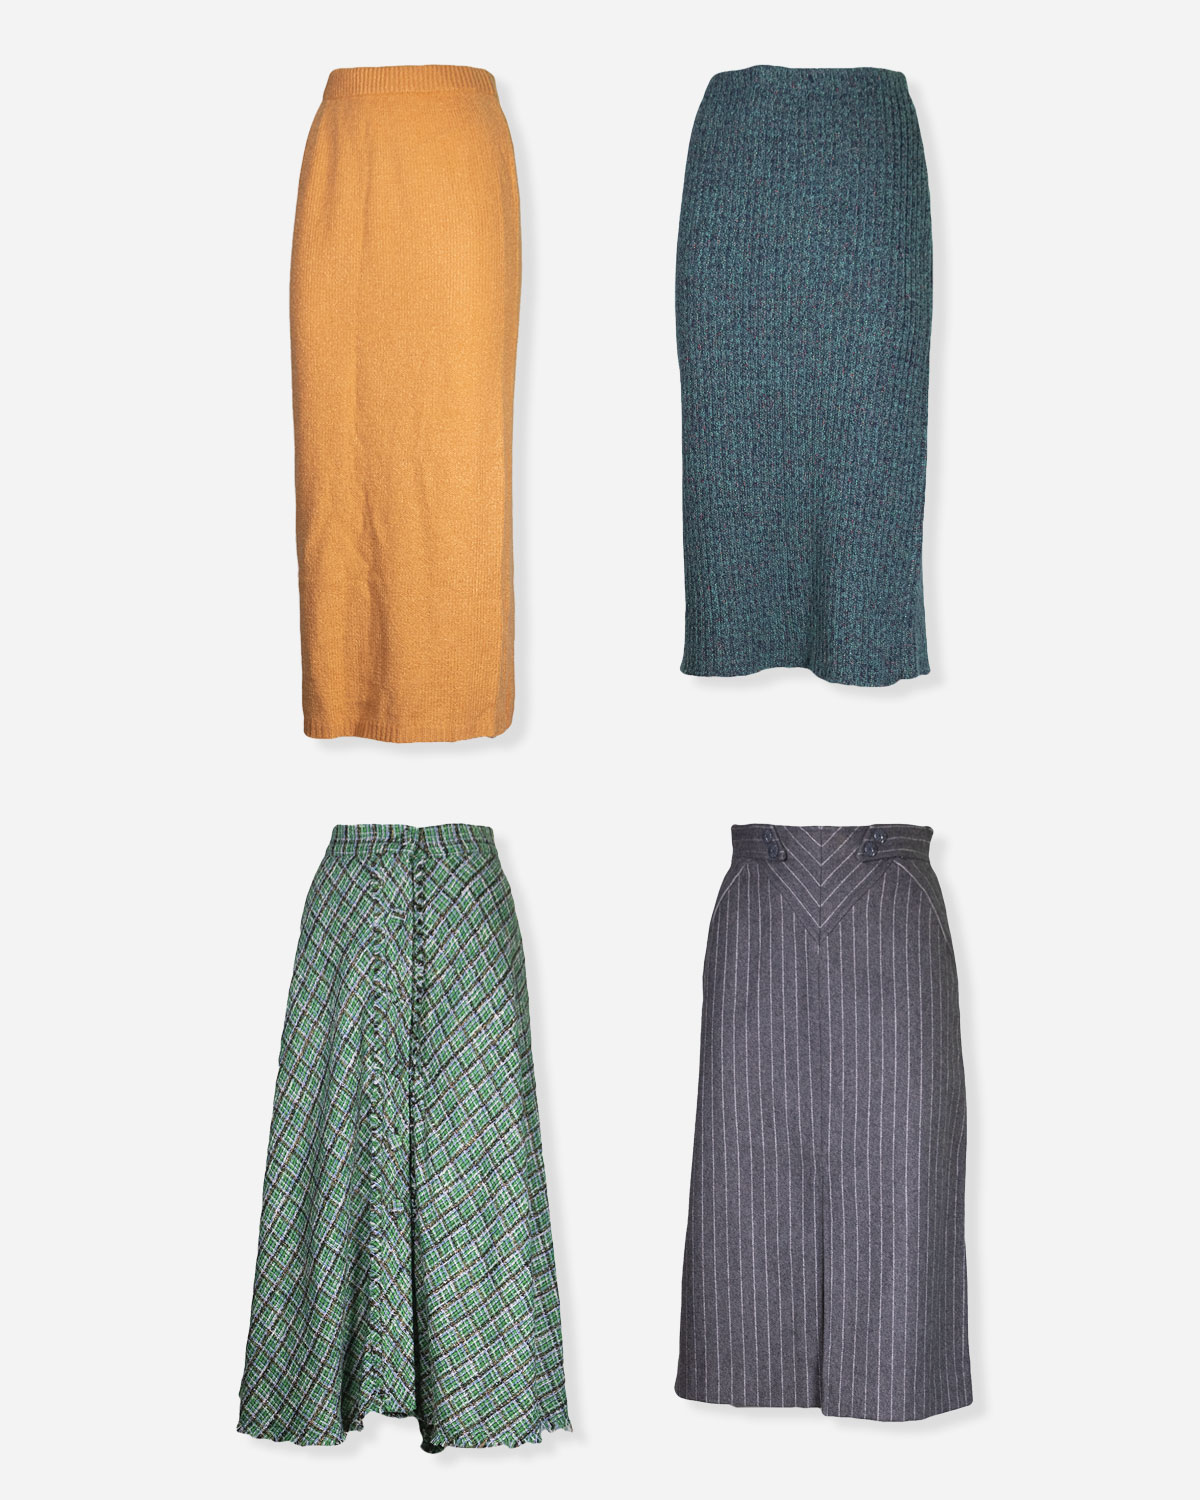 80-90s winter long skirts: 4 pieces